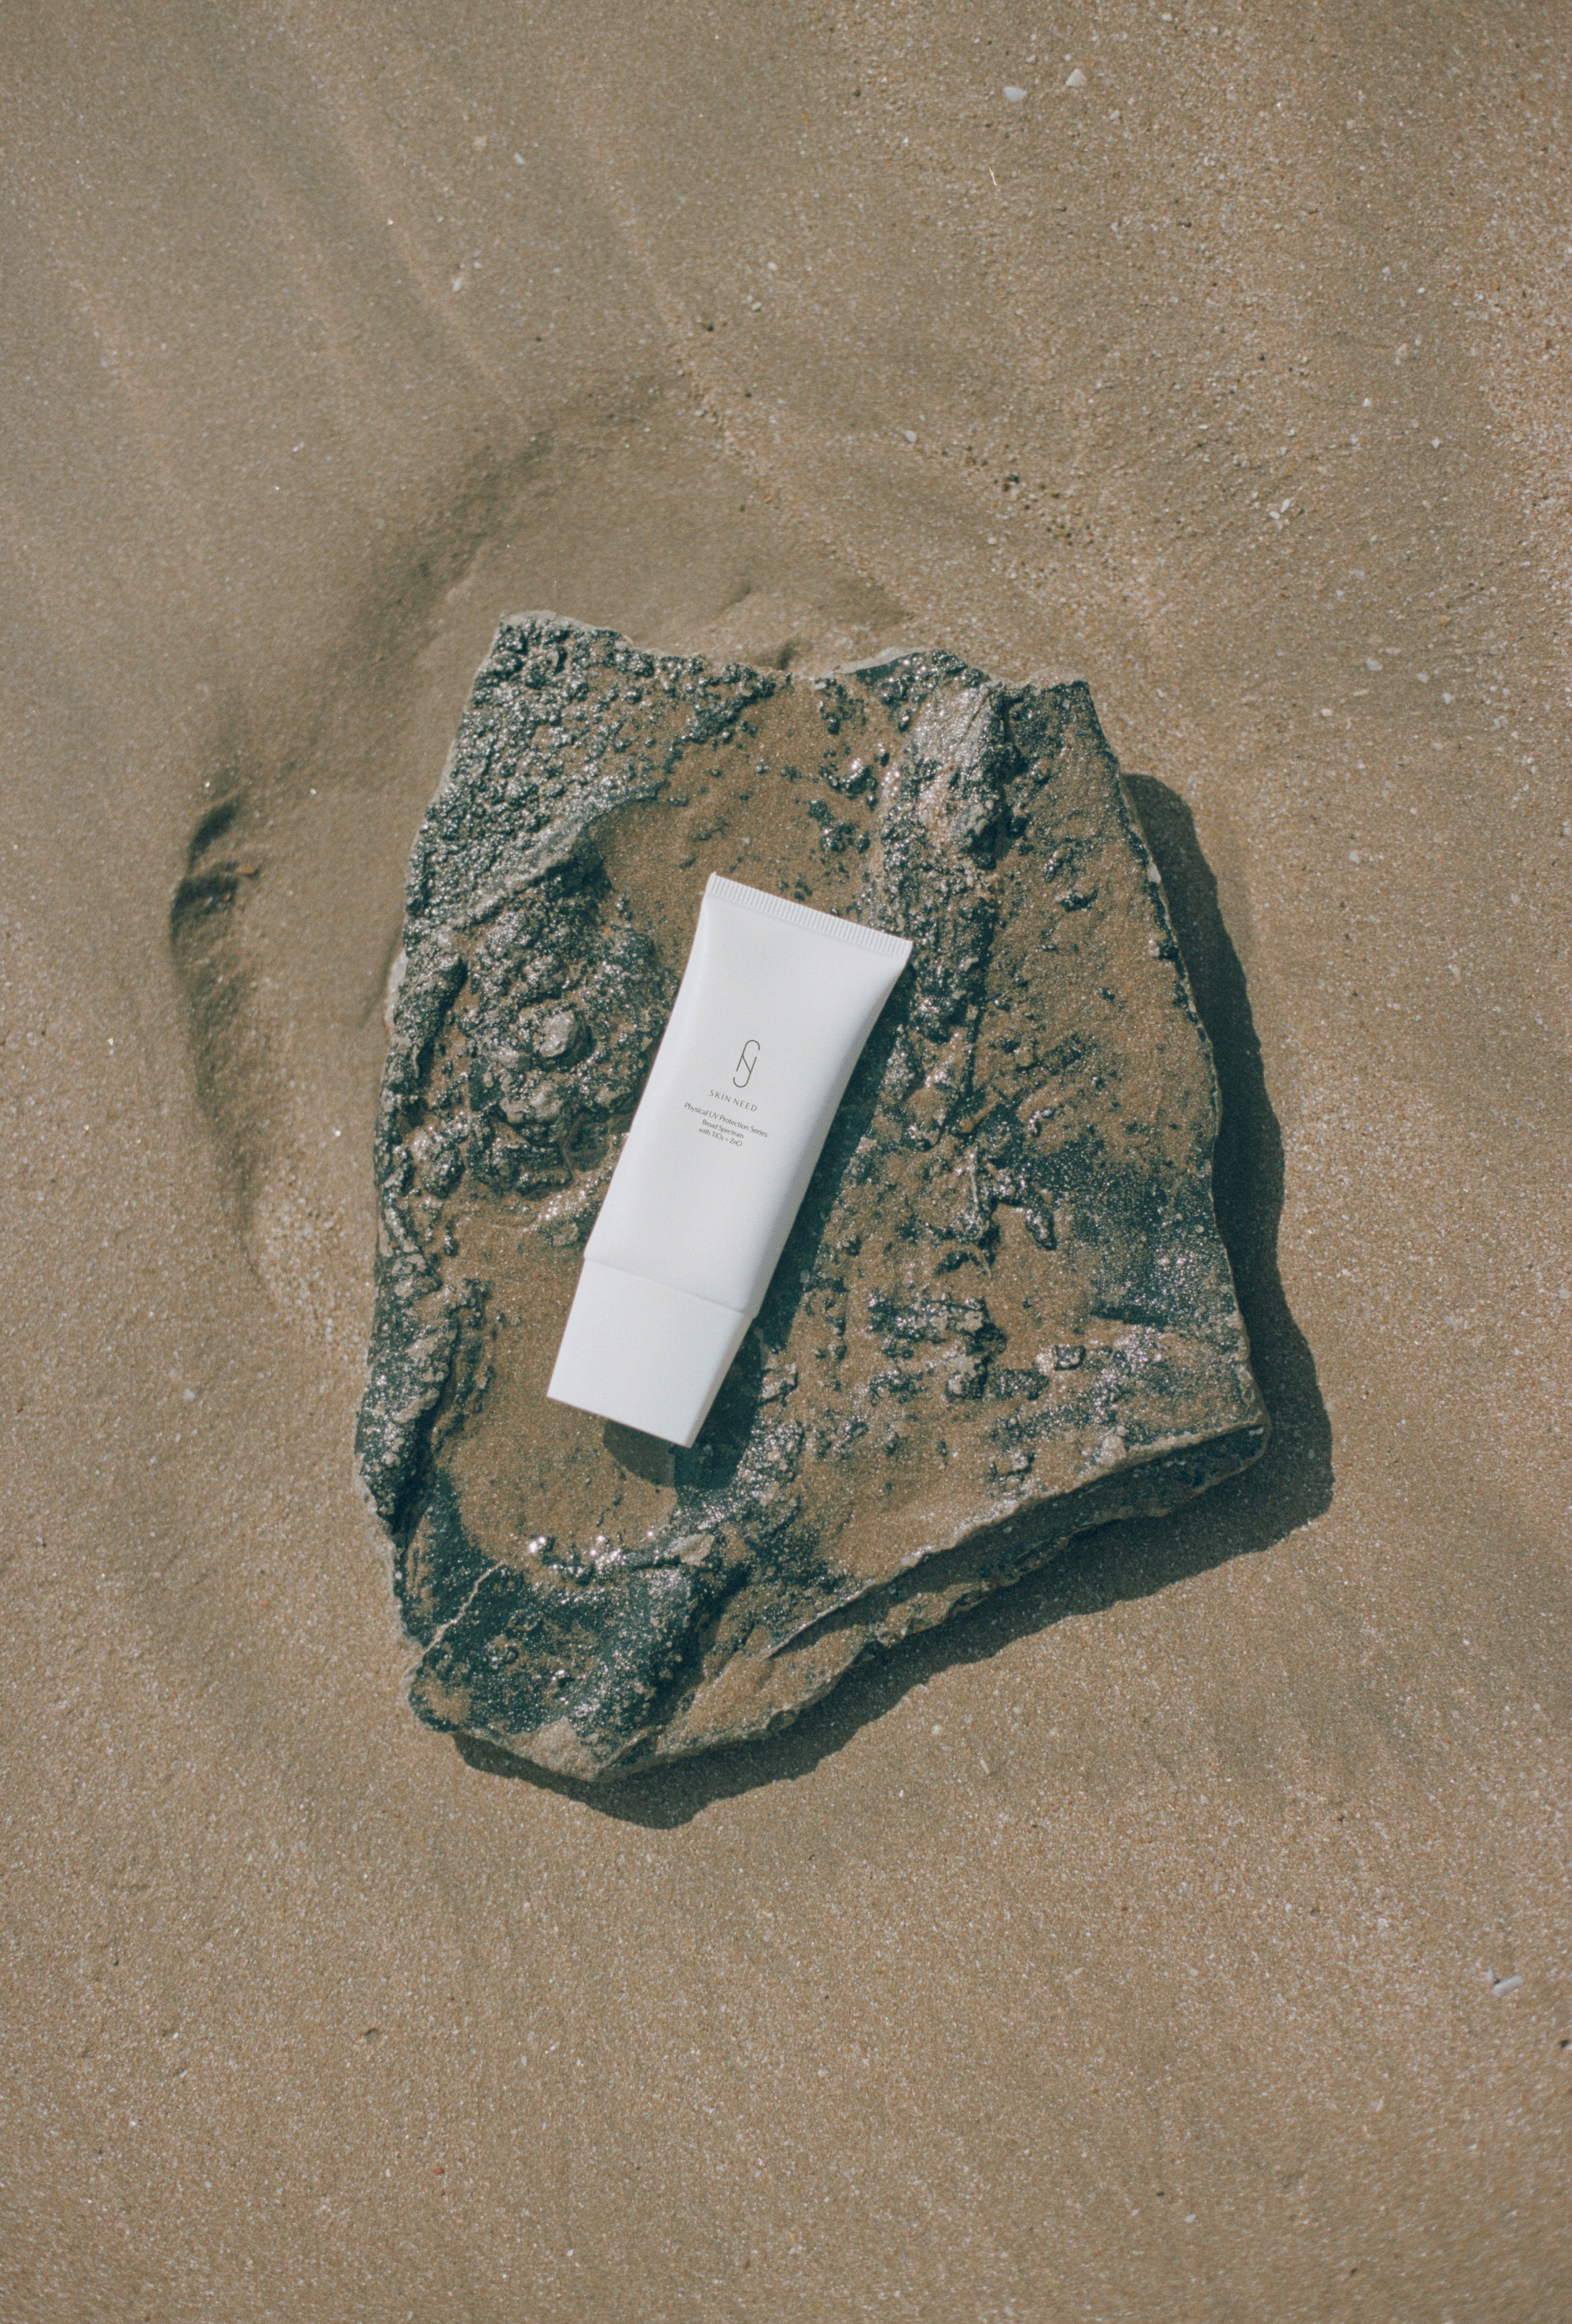 Suncare continues to be important past summer, which is why we’re eyeing Skin Need’s 100% Mineral Sunscreen for autumn. Photo: Skin Need